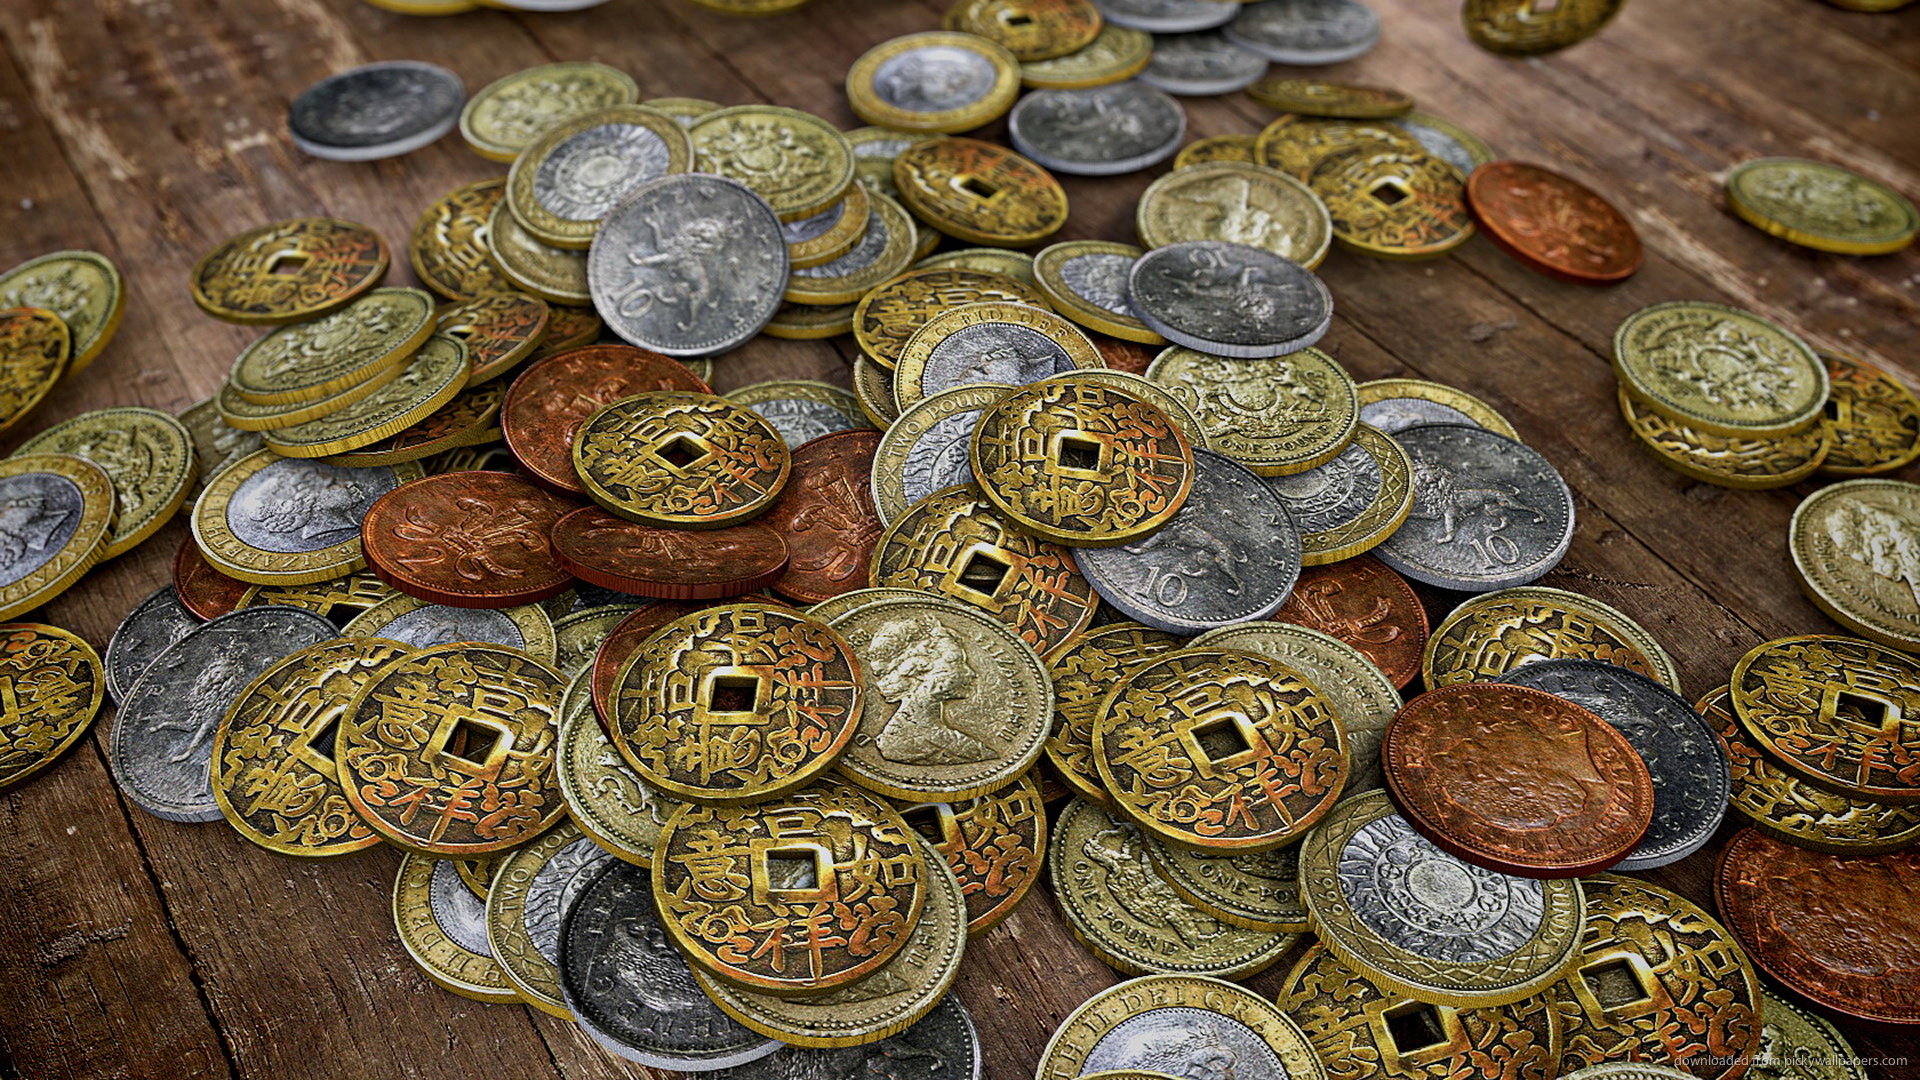 Ancient Money Coins Up Close Wallpaper Screensaver For Kindle3 And Dx